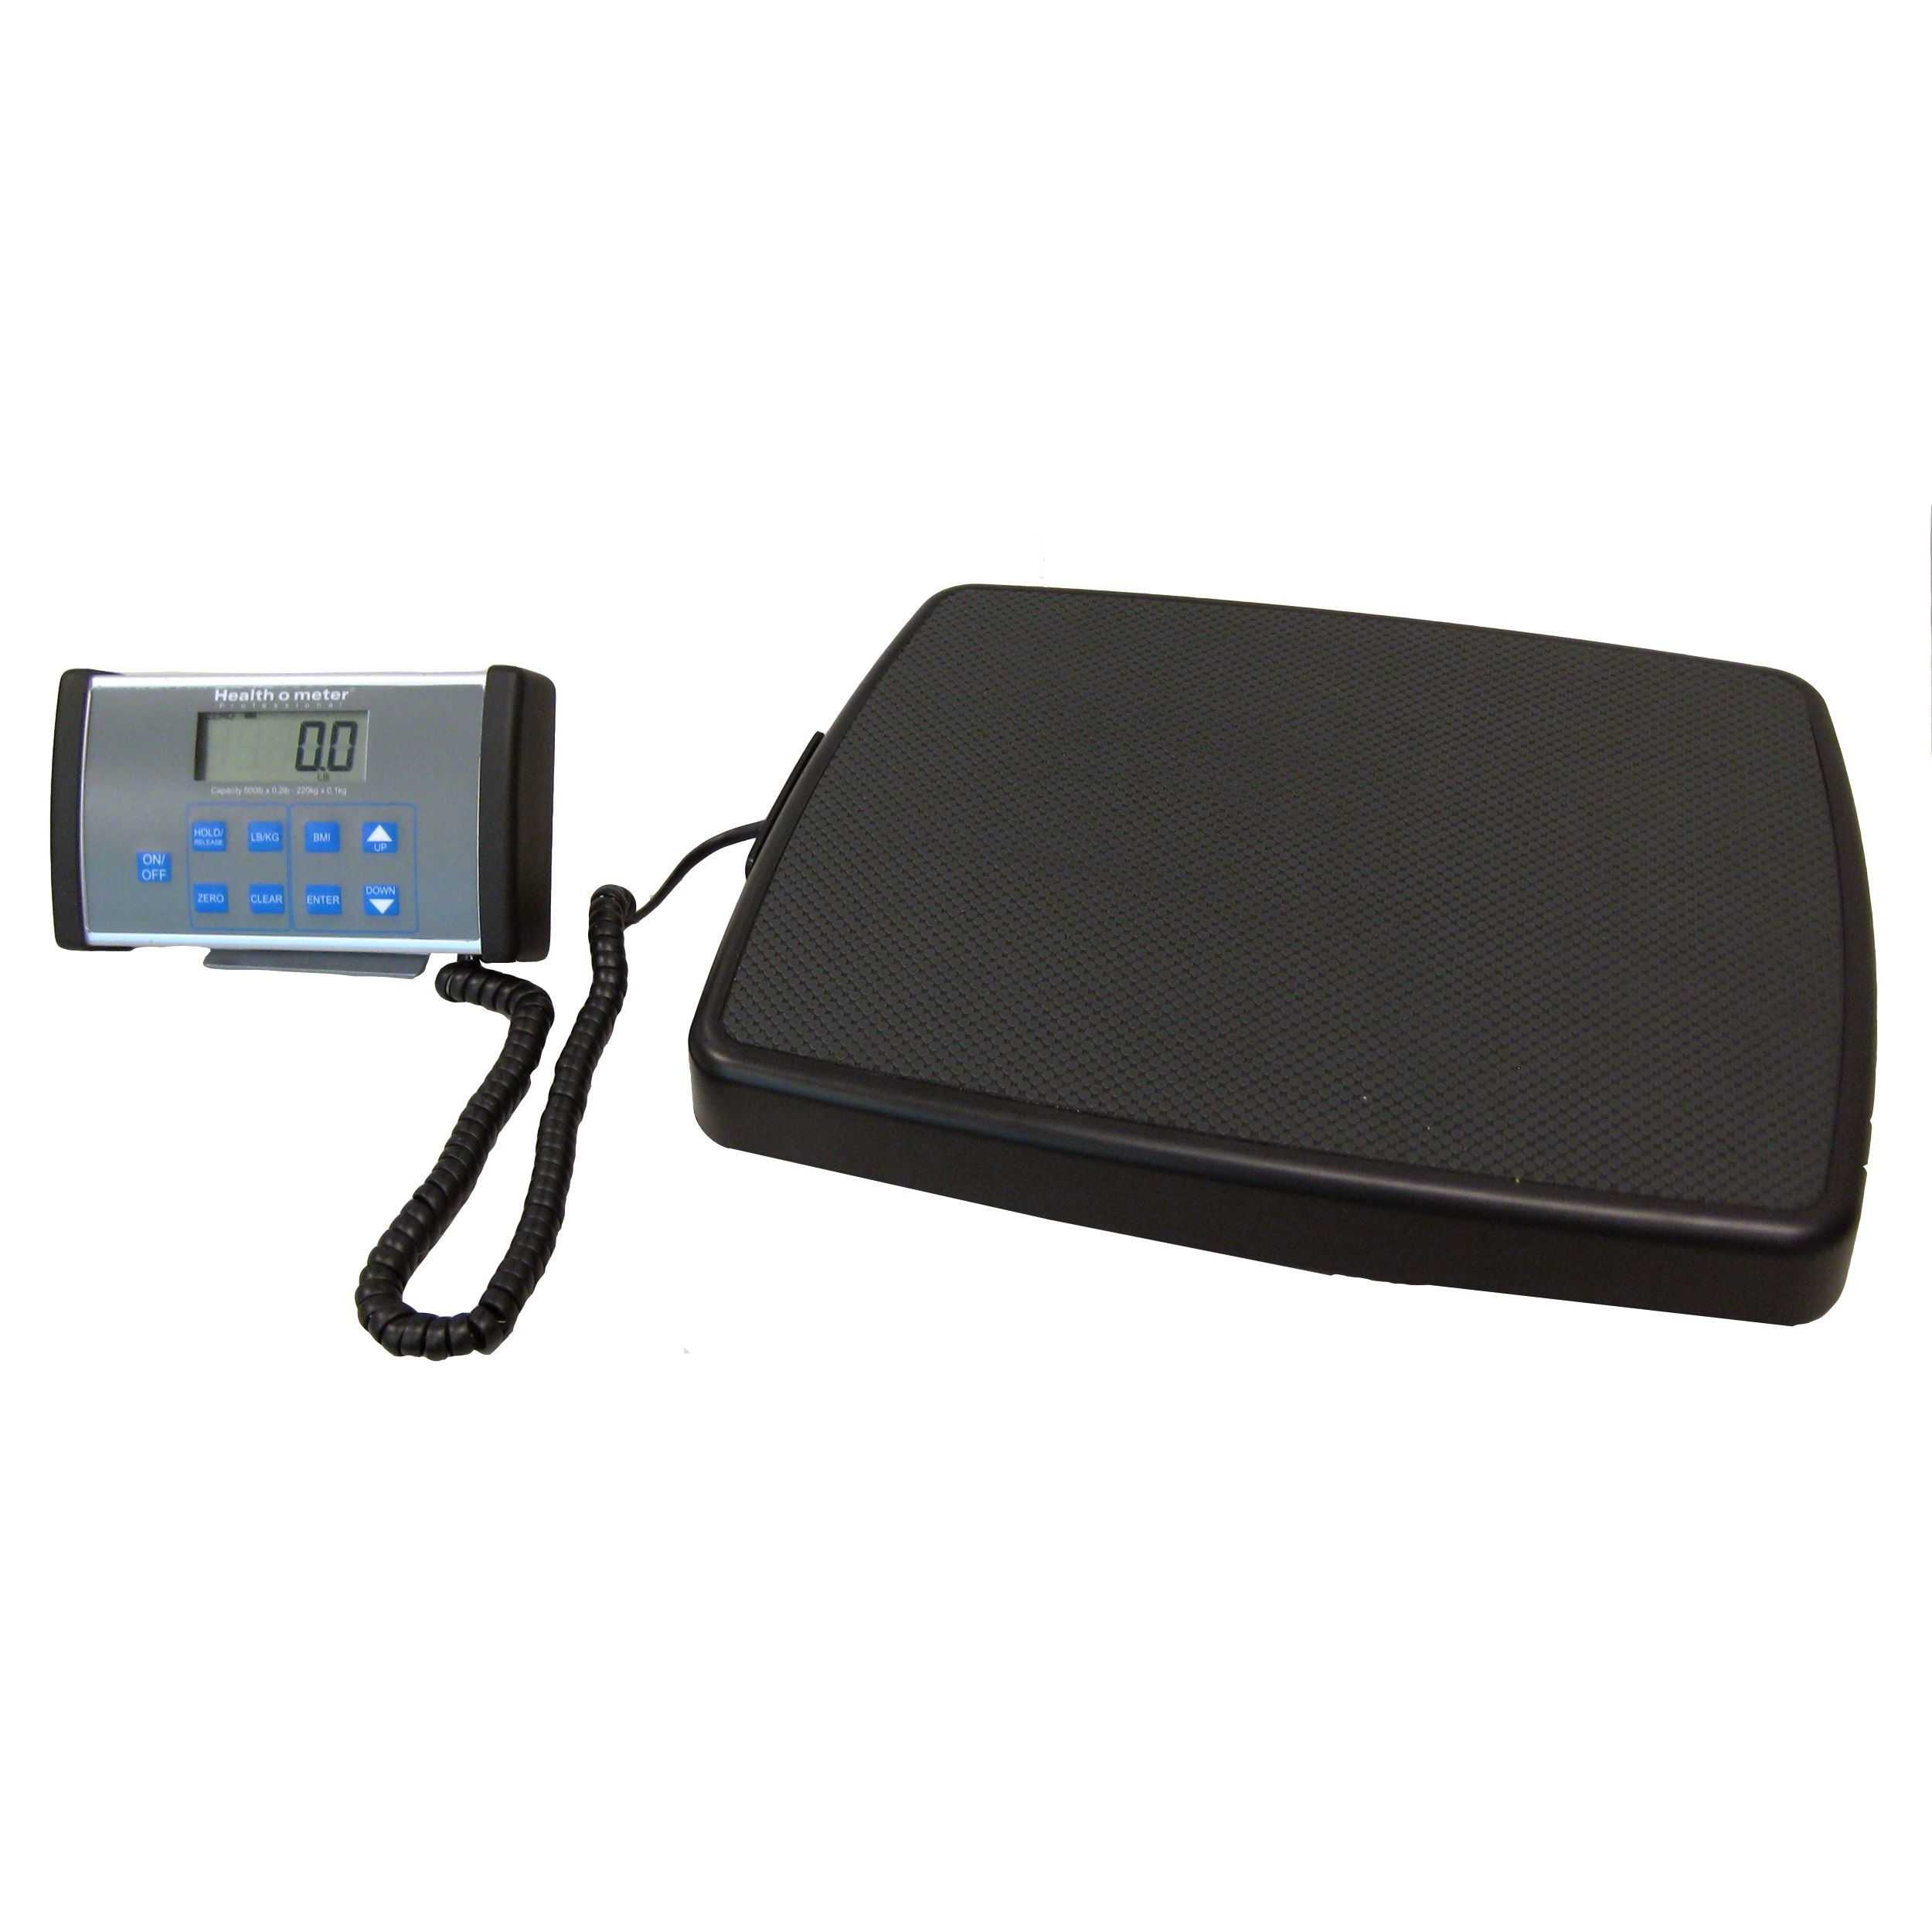 HealthOMeter-599KLHR Waist High Medical Scale with AC Adapter & Height Rod